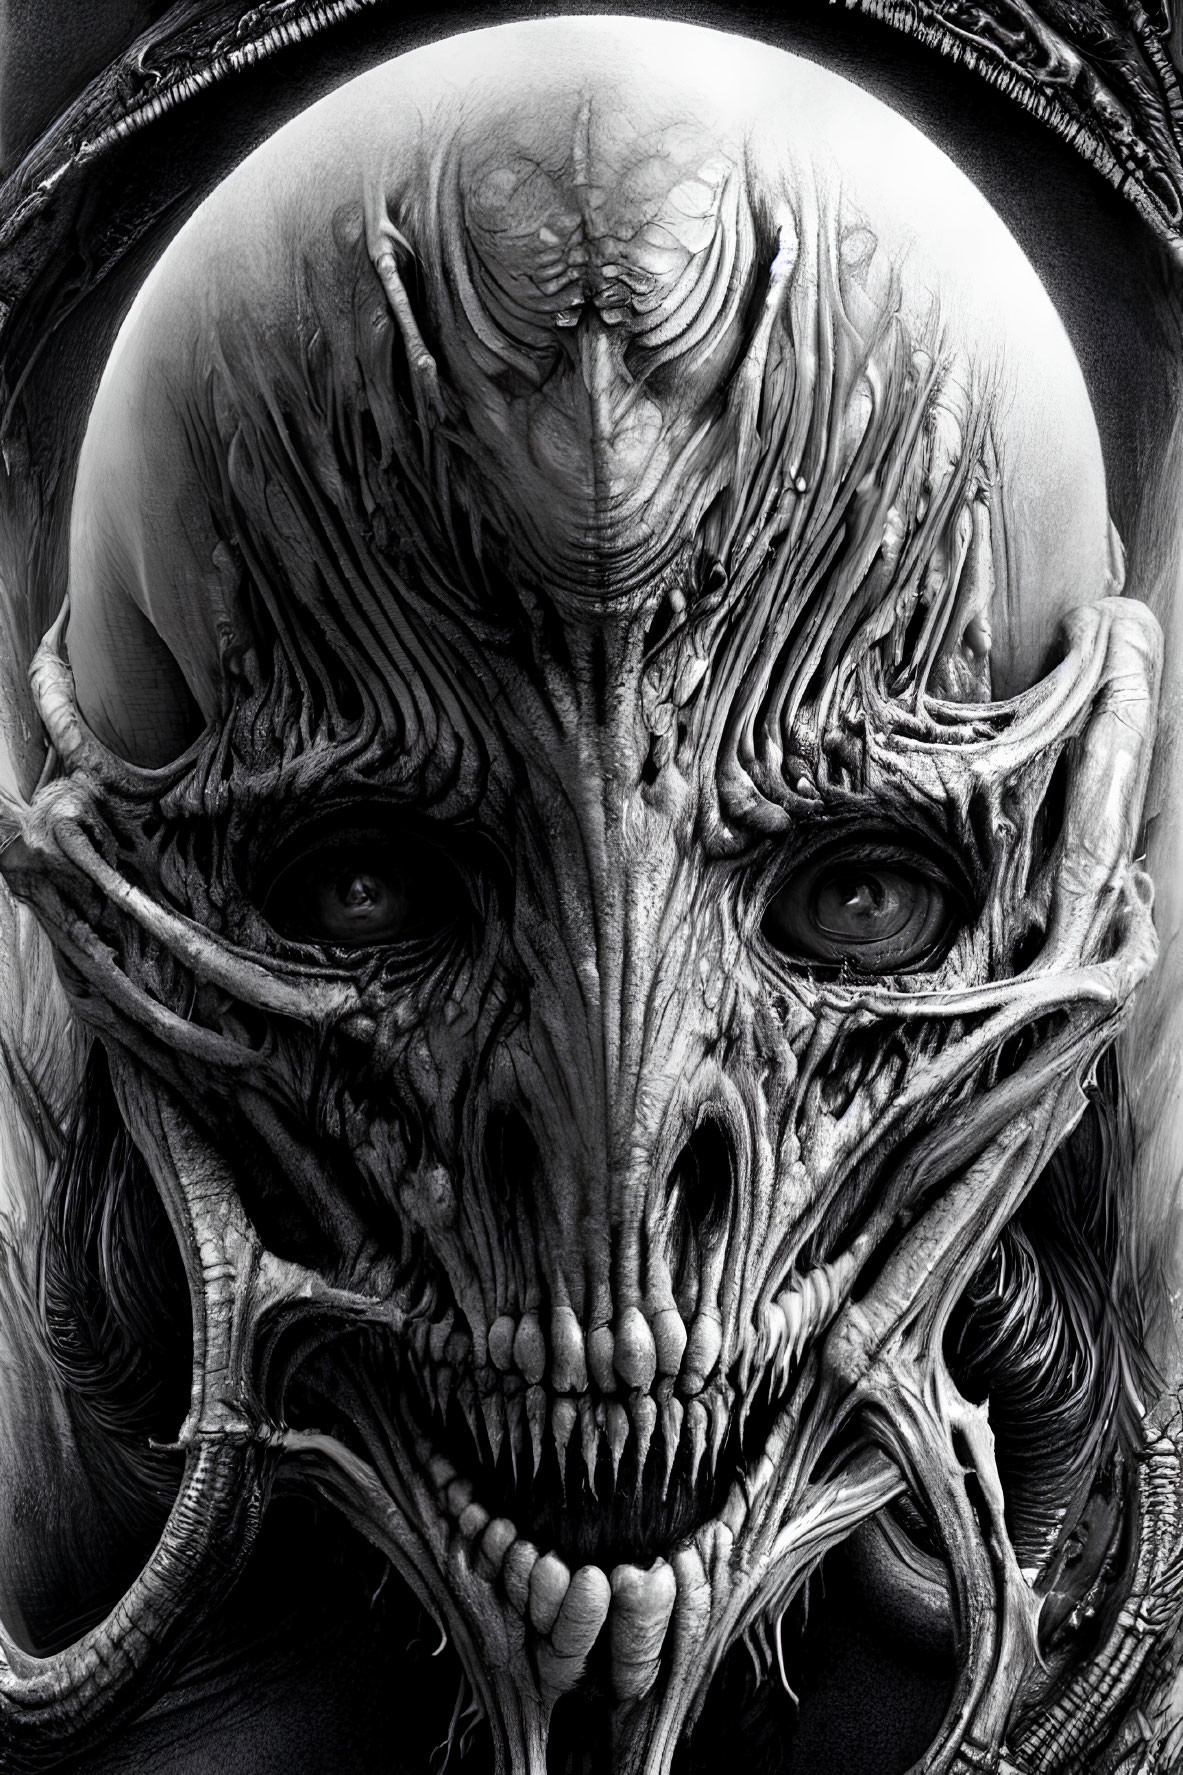 Monochrome humanoid creature with skull-like features and intense eyes